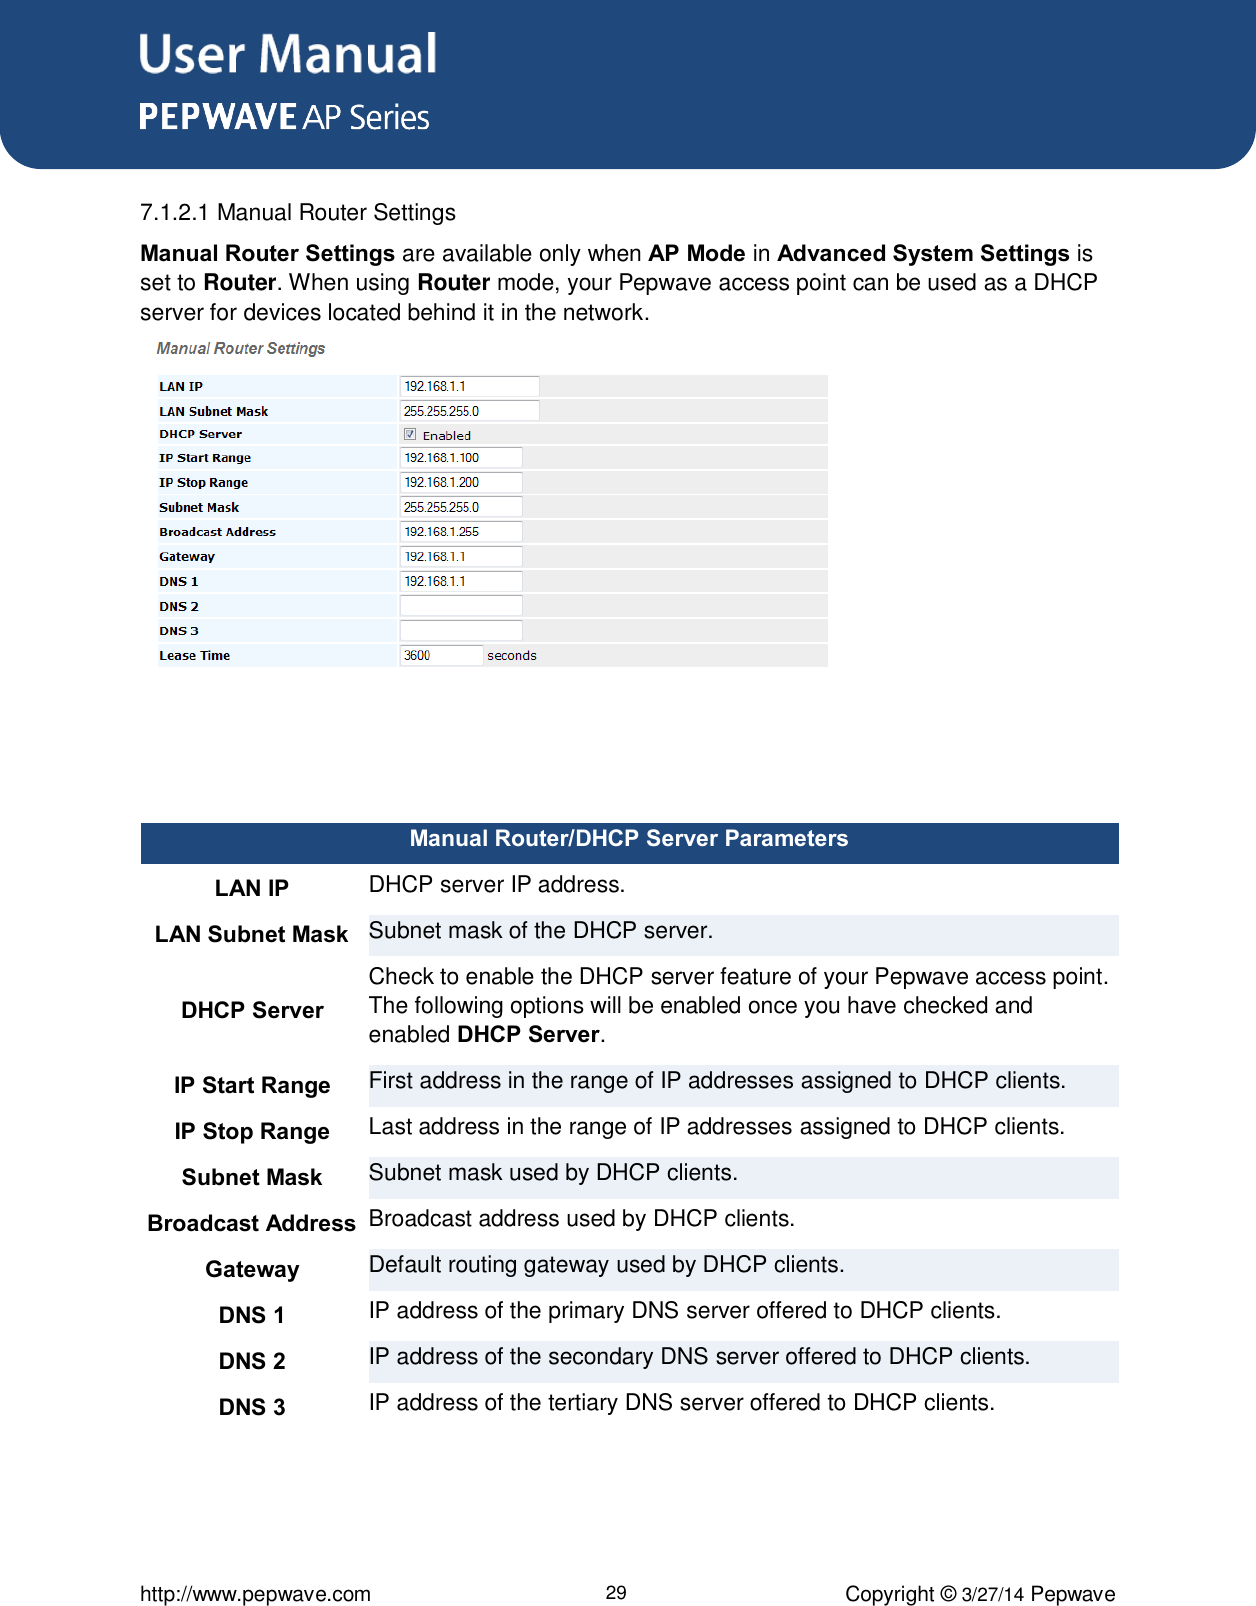 User Manual      http://www.pepwave.com 29 Copyright ©  3/27/14 Pepwave  7.1.2.1 Manual Router Settings Manual Router Settings are available only when AP Mode in Advanced System Settings is set to Router. When using Router mode, your Pepwave access point can be used as a DHCP server for devices located behind it in the network.  Manual Router/DHCP Server Parameters LAN IP DHCP server IP address. LAN Subnet Mask Subnet mask of the DHCP server. DHCP Server Check to enable the DHCP server feature of your Pepwave access point. The following options will be enabled once you have checked and enabled DHCP Server. IP Start Range First address in the range of IP addresses assigned to DHCP clients. IP Stop Range Last address in the range of IP addresses assigned to DHCP clients. Subnet Mask Subnet mask used by DHCP clients. Broadcast Address Broadcast address used by DHCP clients. Gateway Default routing gateway used by DHCP clients. DNS 1 IP address of the primary DNS server offered to DHCP clients. DNS 2 IP address of the secondary DNS server offered to DHCP clients. DNS 3 IP address of the tertiary DNS server offered to DHCP clients.  